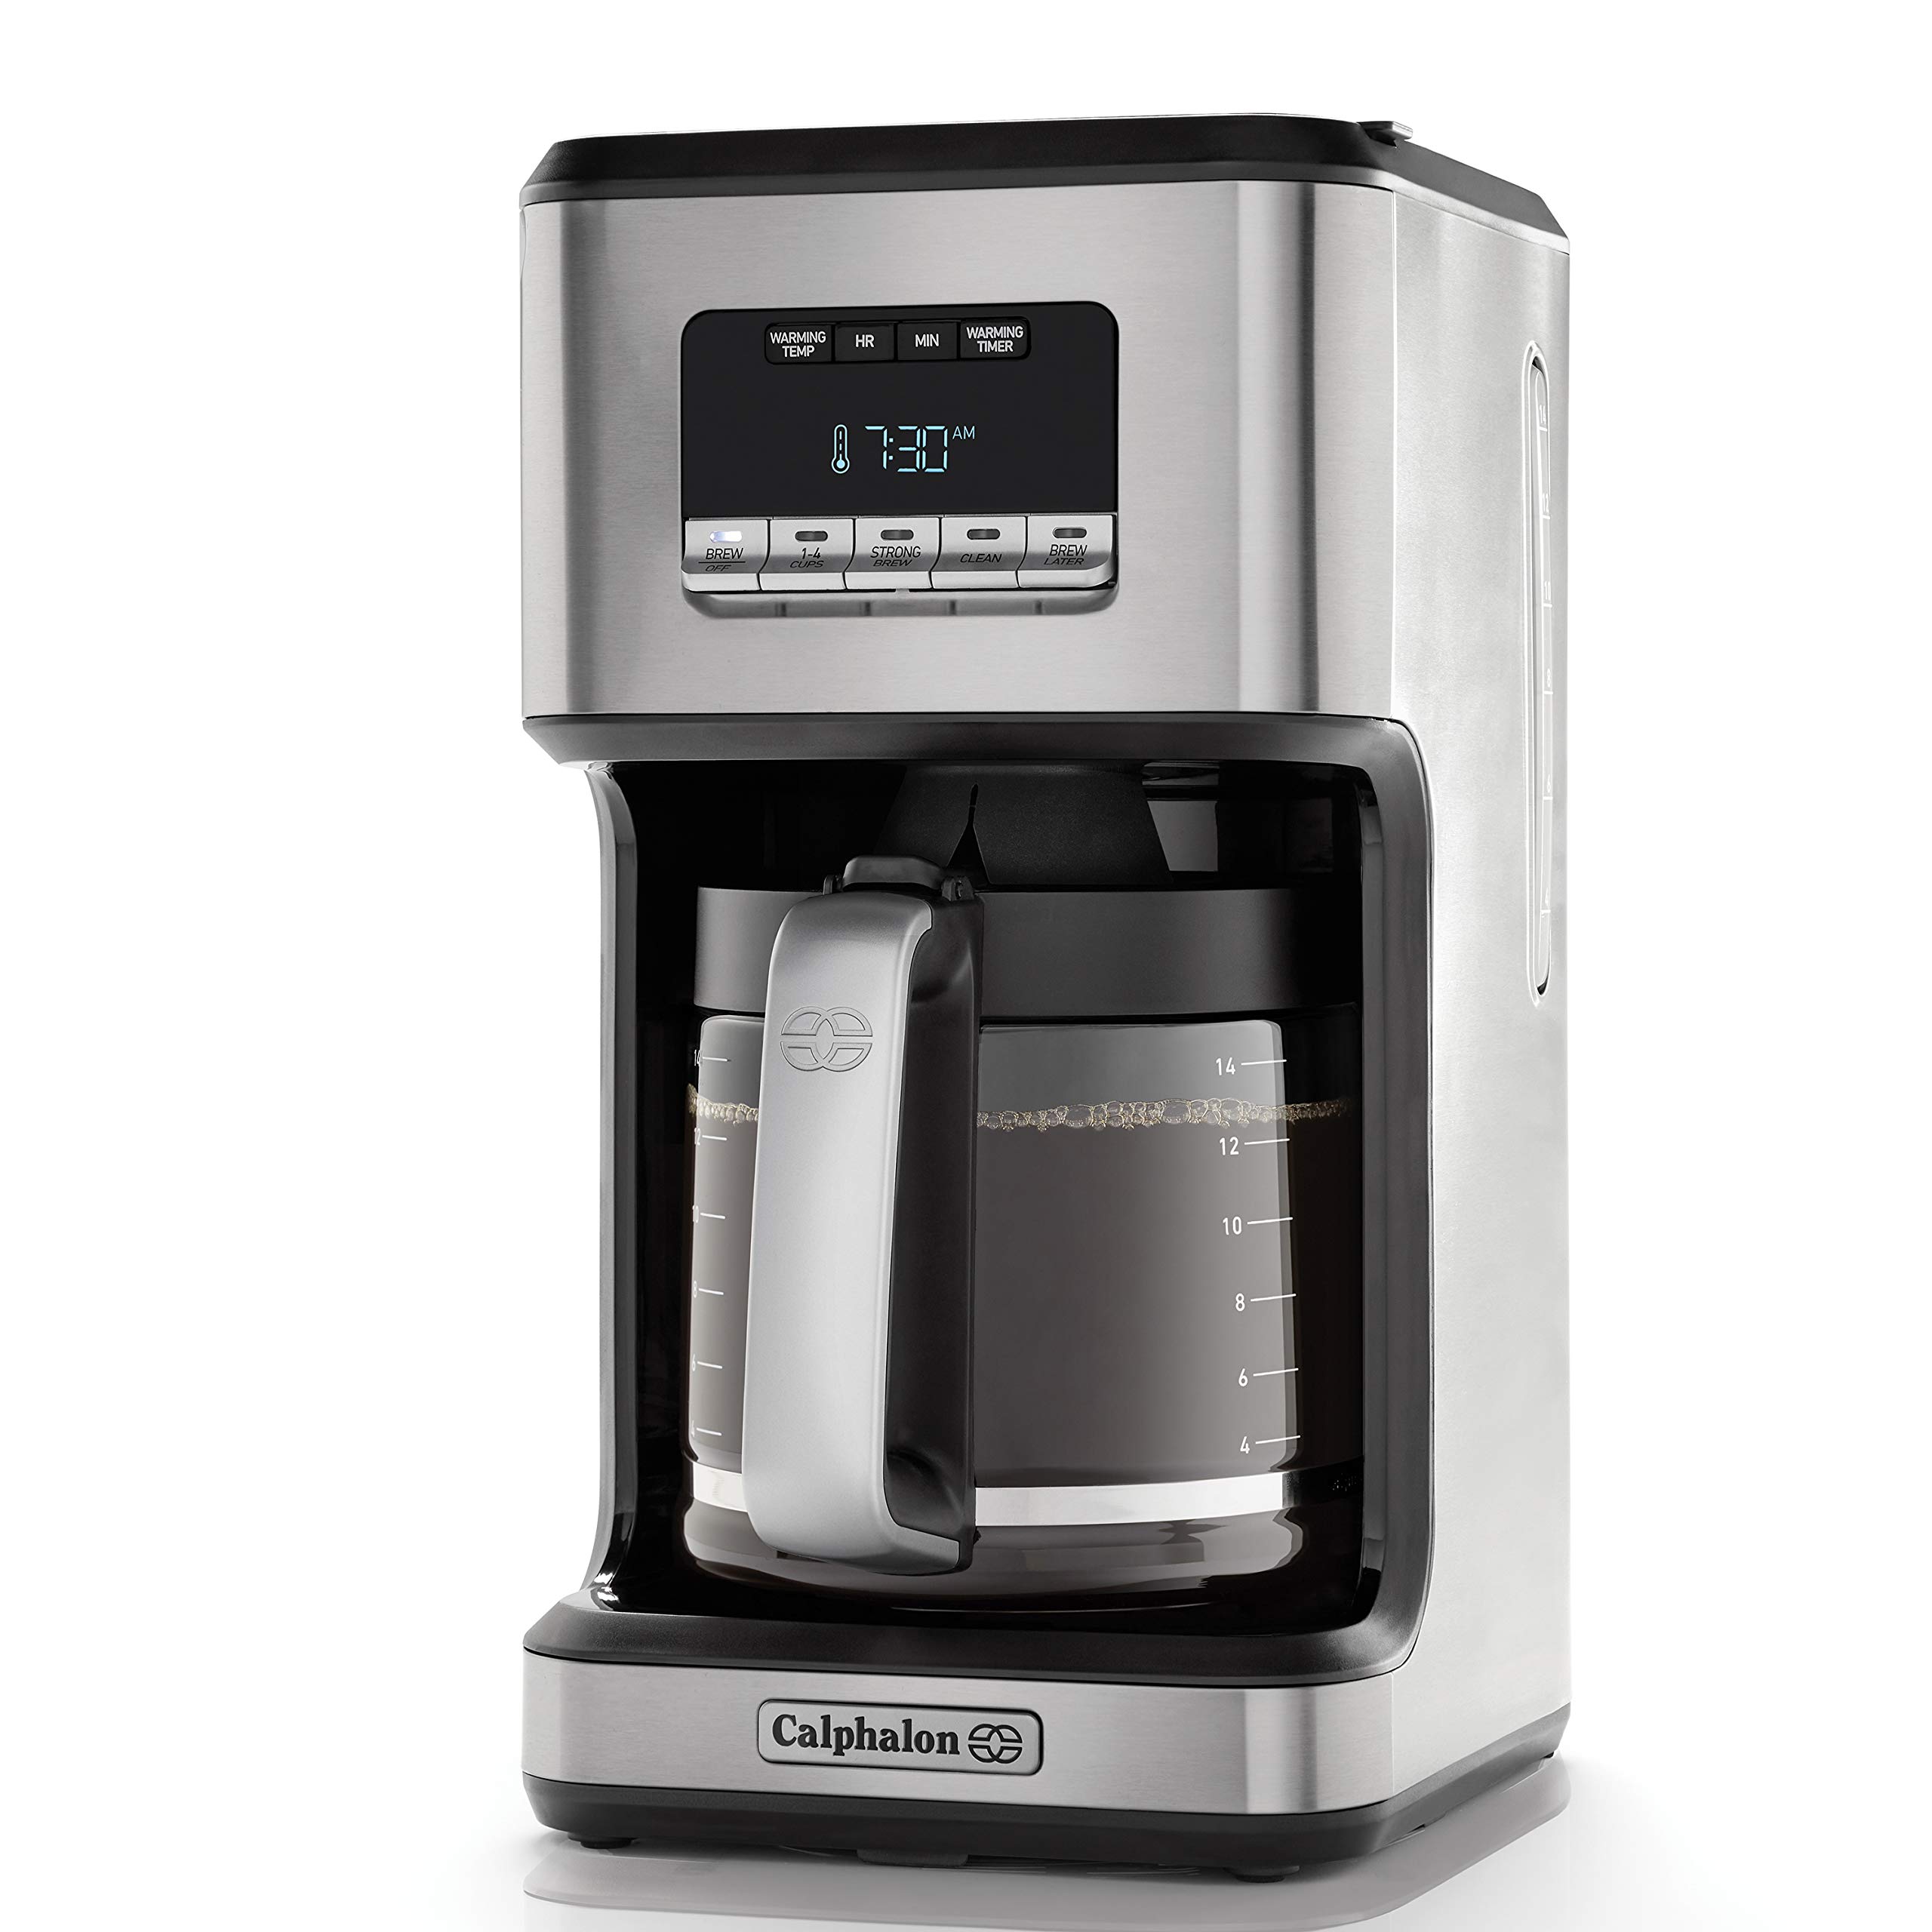 14-Cup Calphalon Programmable Coffee Maker w/ Glass Carafe (Stainless Steel) $57.21 + Free Shipping